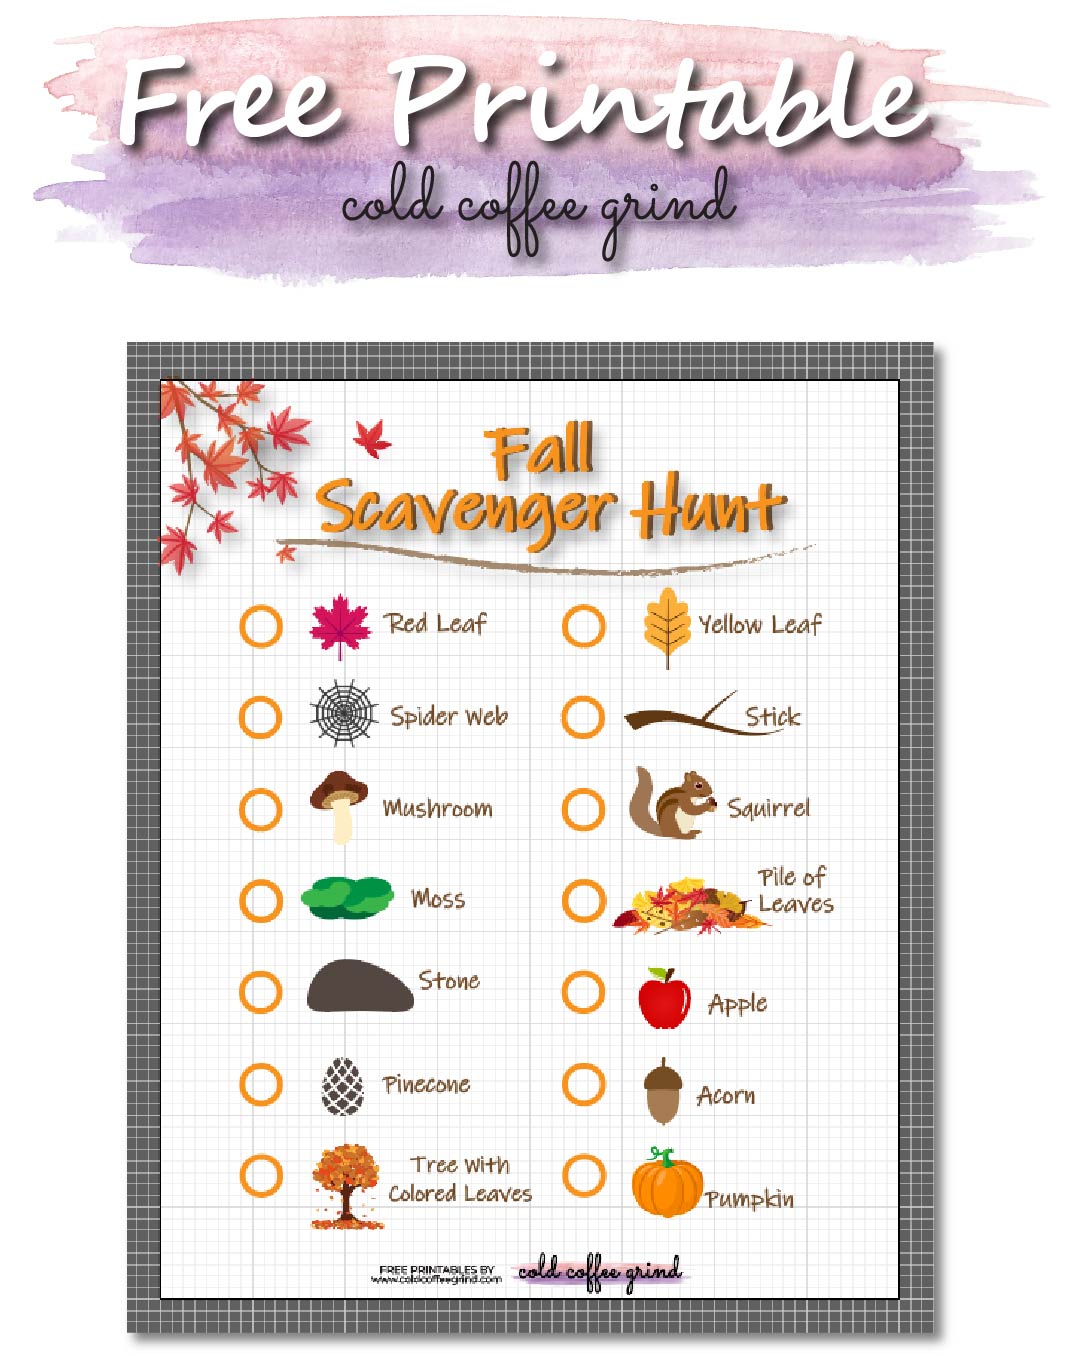 fall-scavenger-hunt-free-printable-cold-coffee-grind